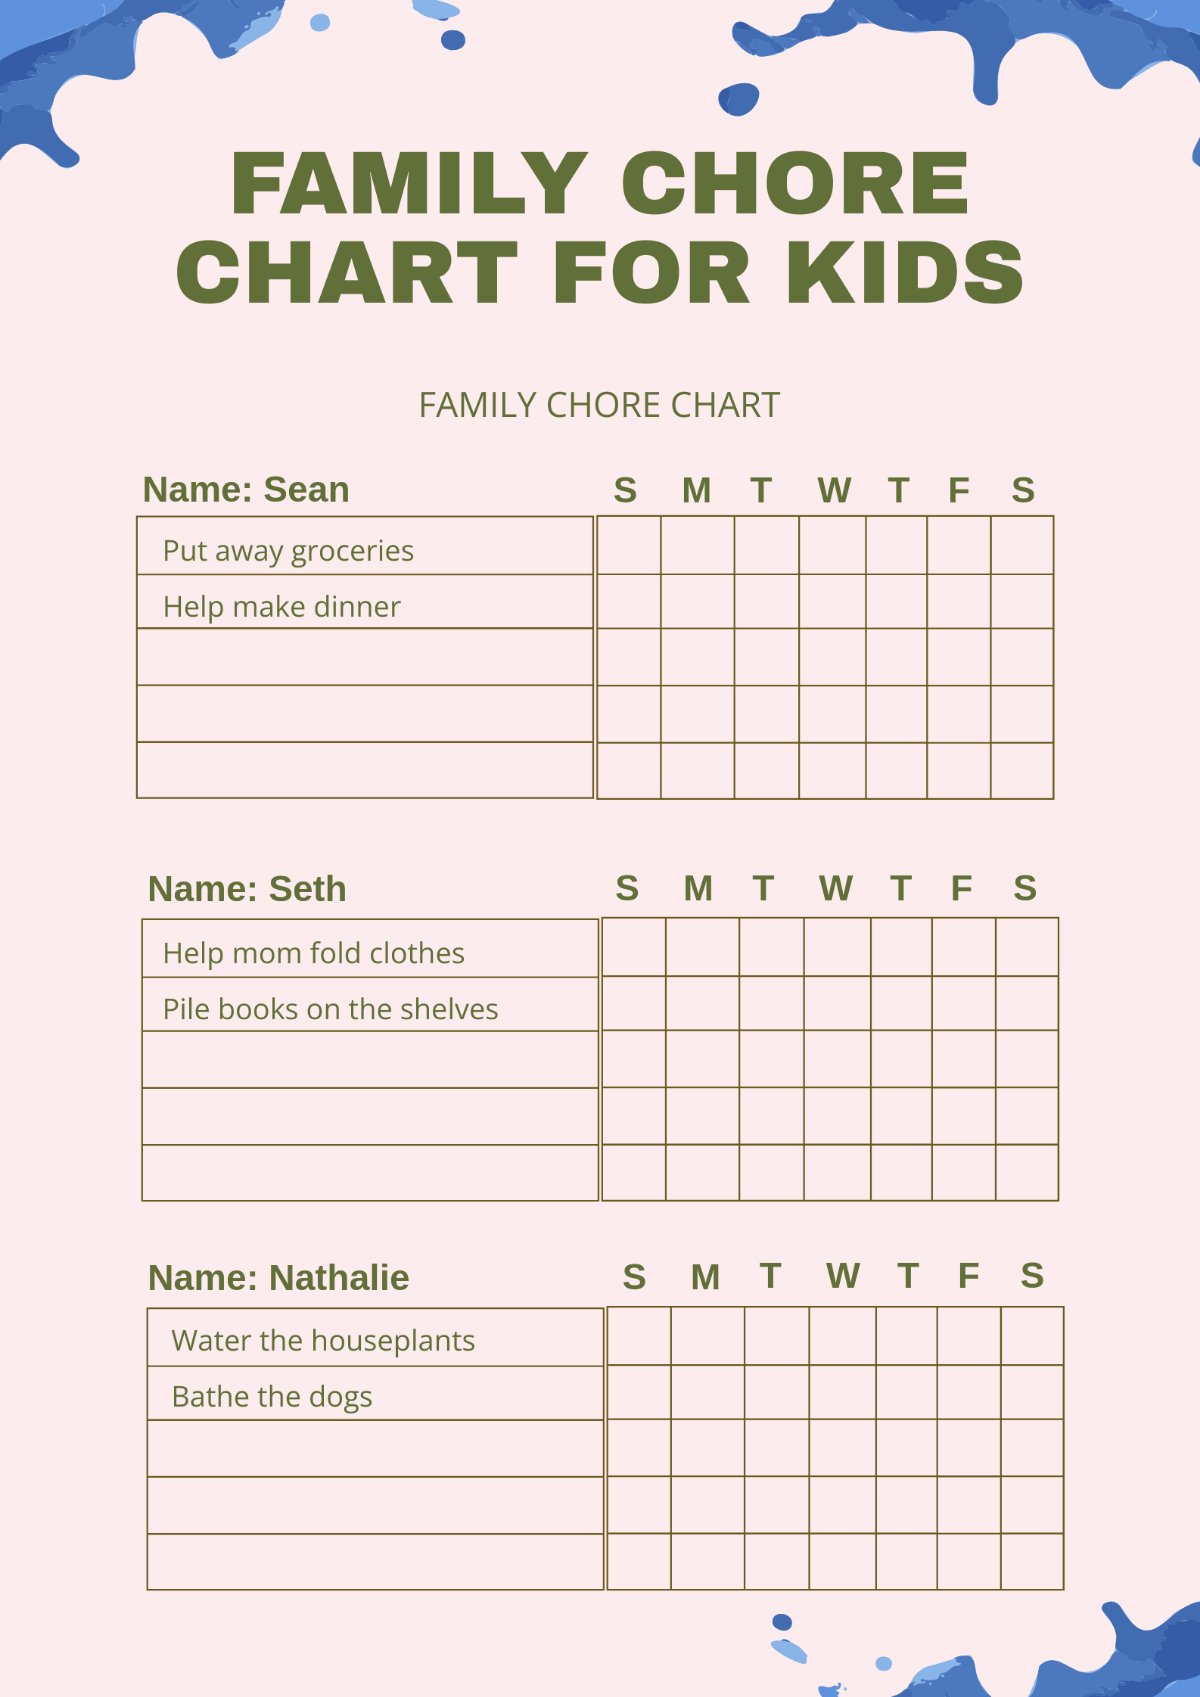 Family Chore Chart For Kids Template